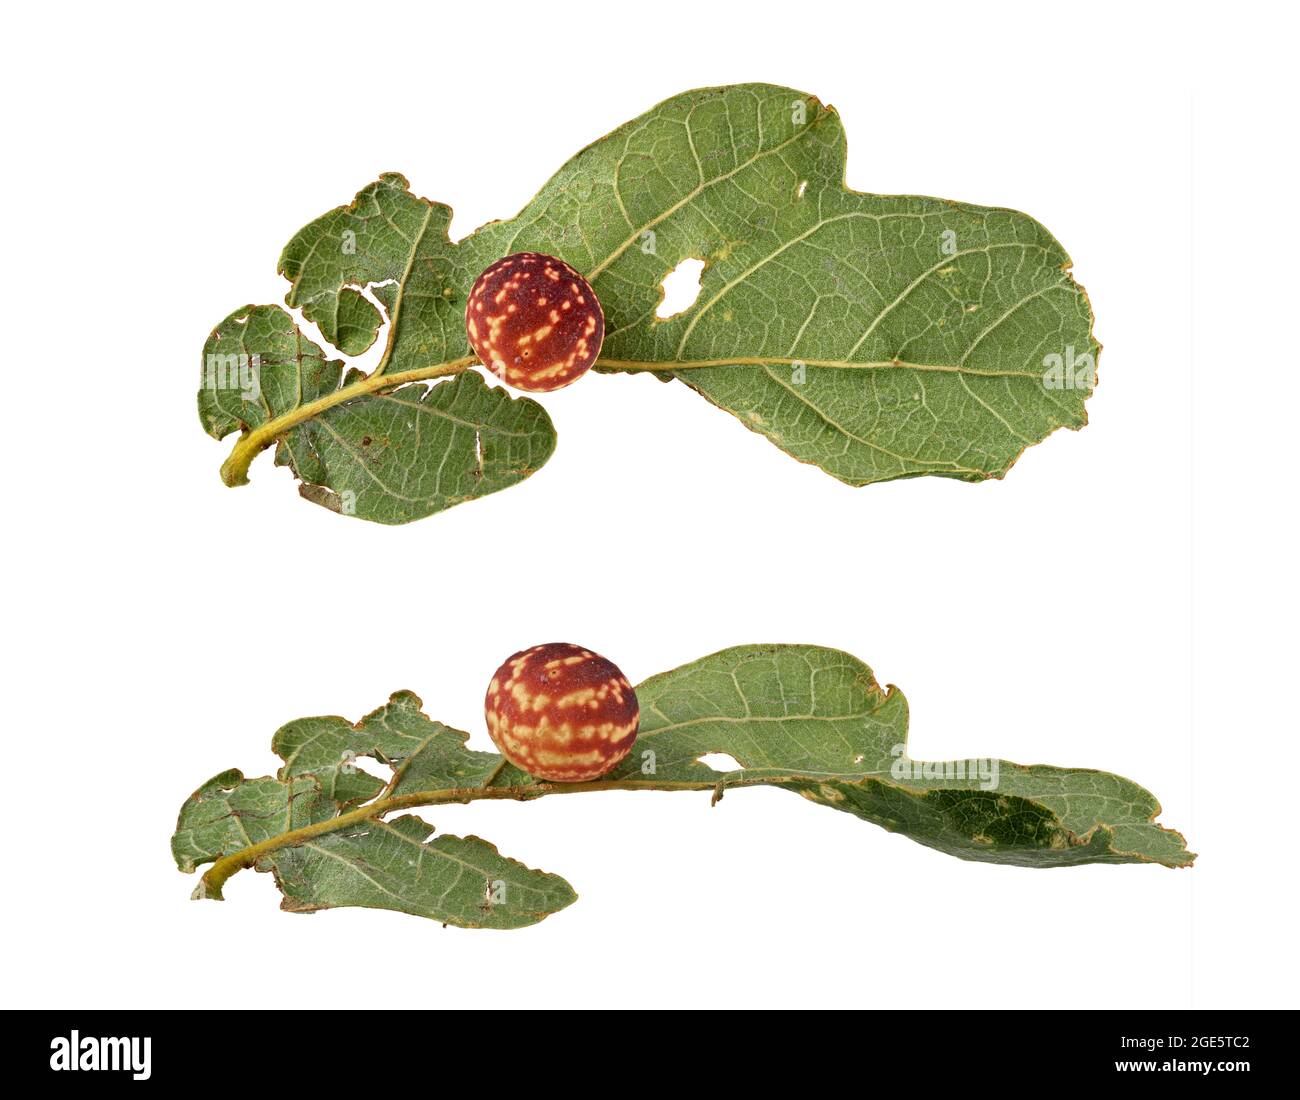 Striped oak gall wasp (Cynips longiventris), gall from the side and from above, leaf of the stem oak (Quercus robur), photo panel, Germany Stock Photo